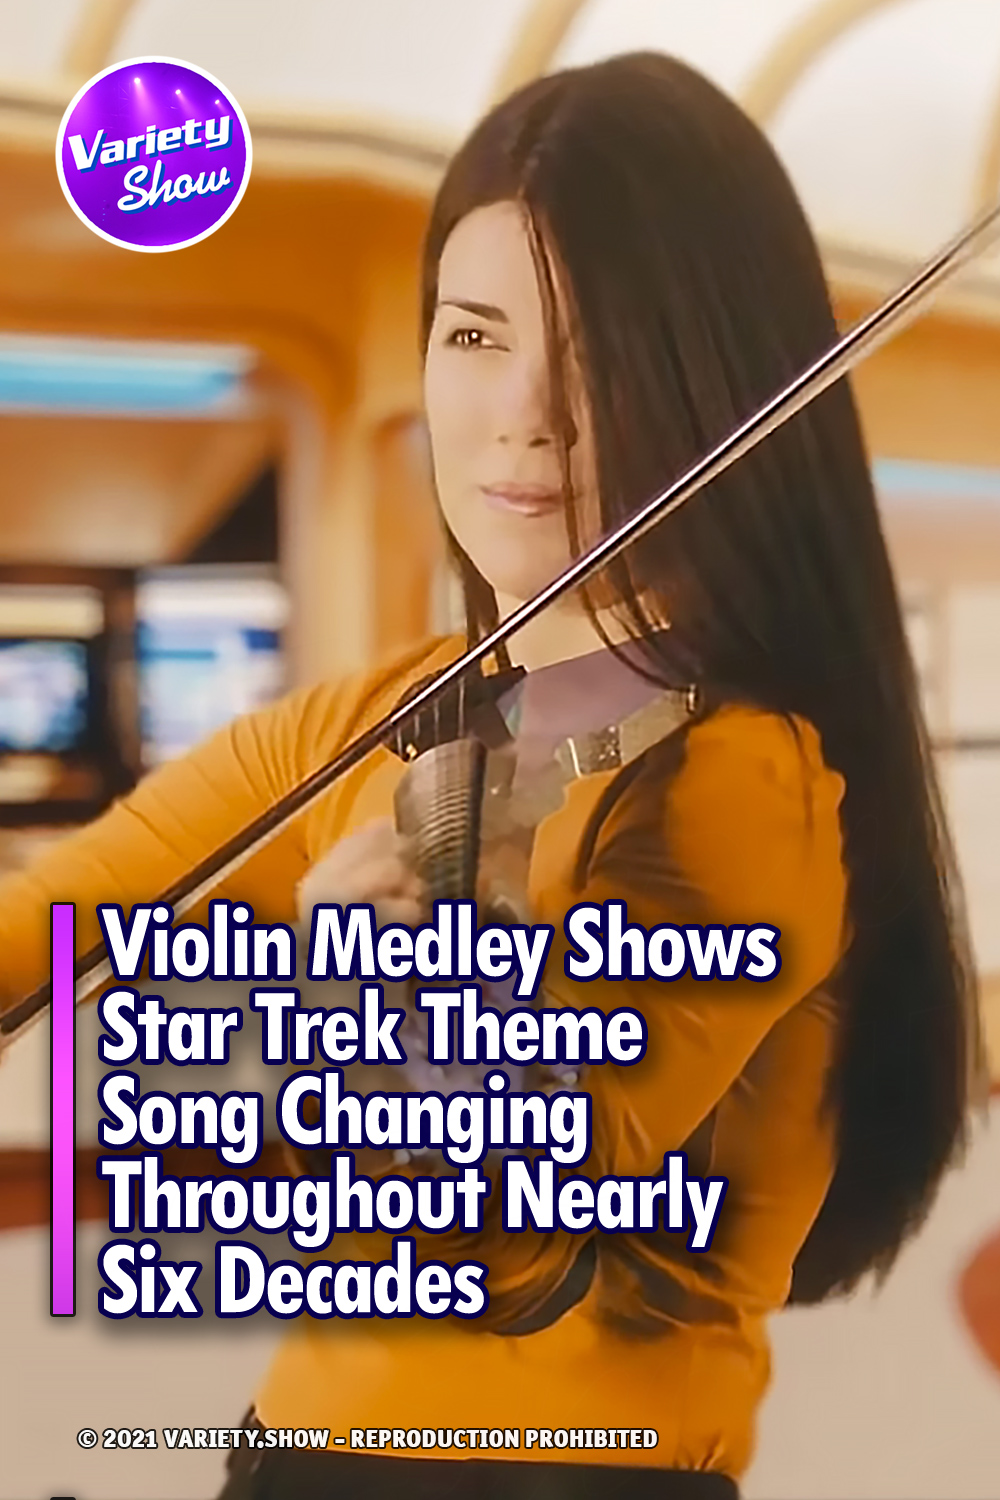 Violin Medley Shows Star Trek Theme Song Changing Throughout Nearly Six Decades